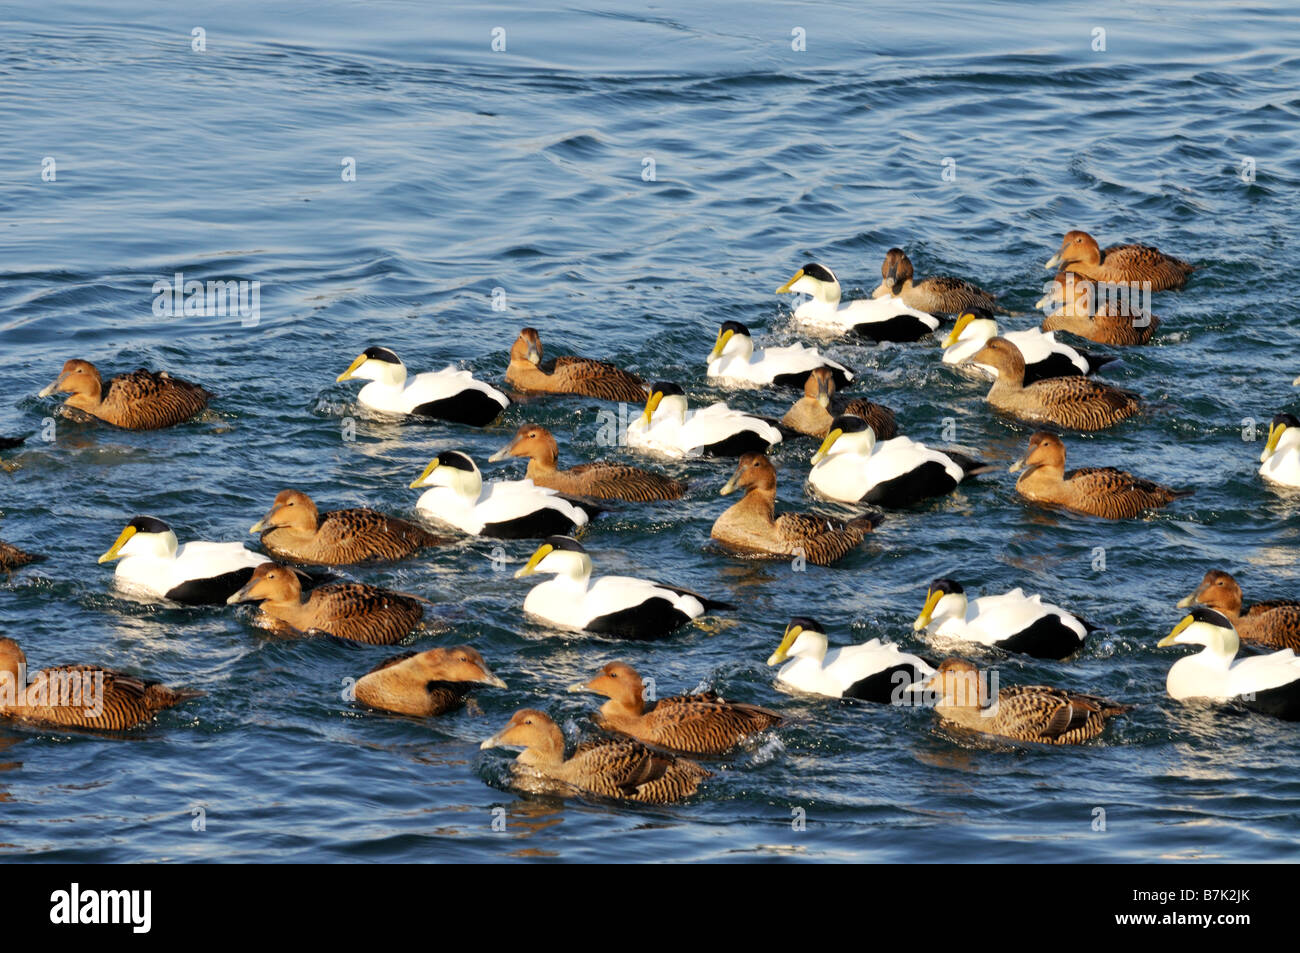 Large flock of Common Eider Ducks swimming in ocean including males and females Stock Photo